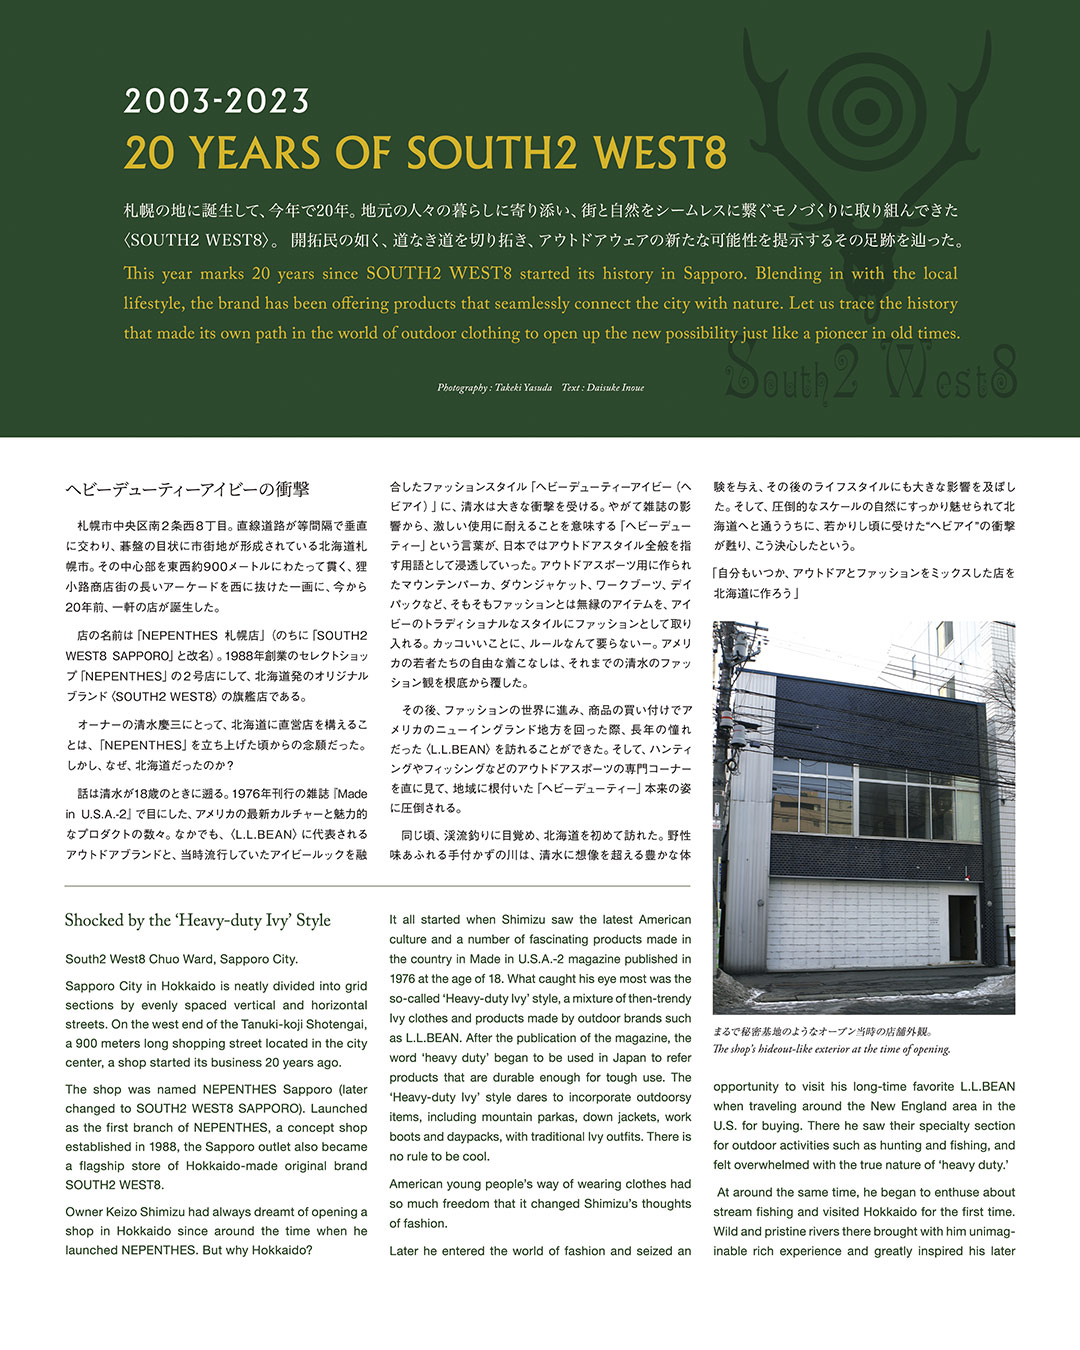 『NEPENTHES in print』 #18“SOUTH2 WEST8 20th Anniversary Issue”